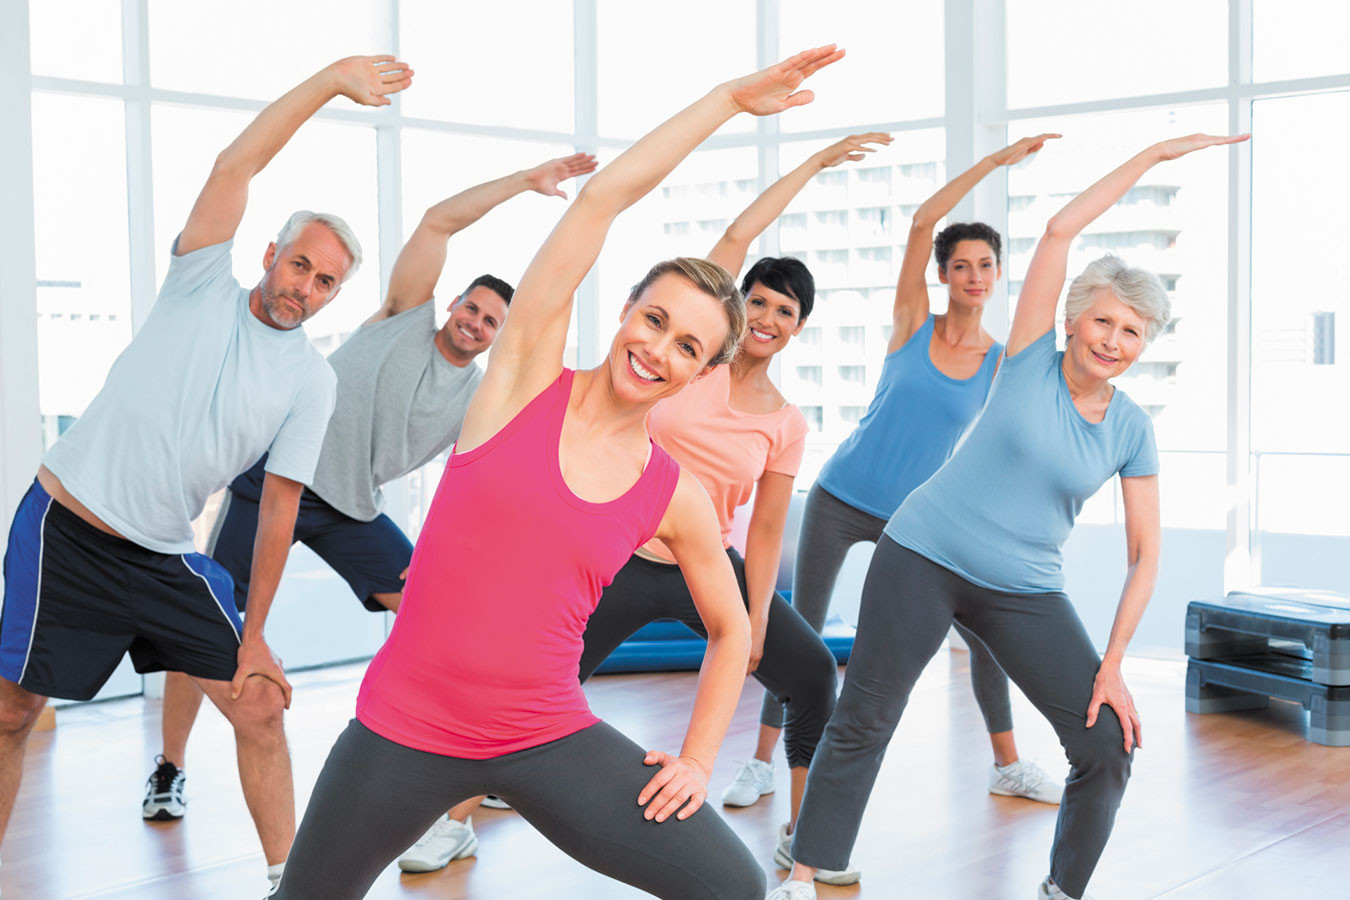 Thriving Through Movement: Staying Active with Medicare – Exercise Tips for Seniors